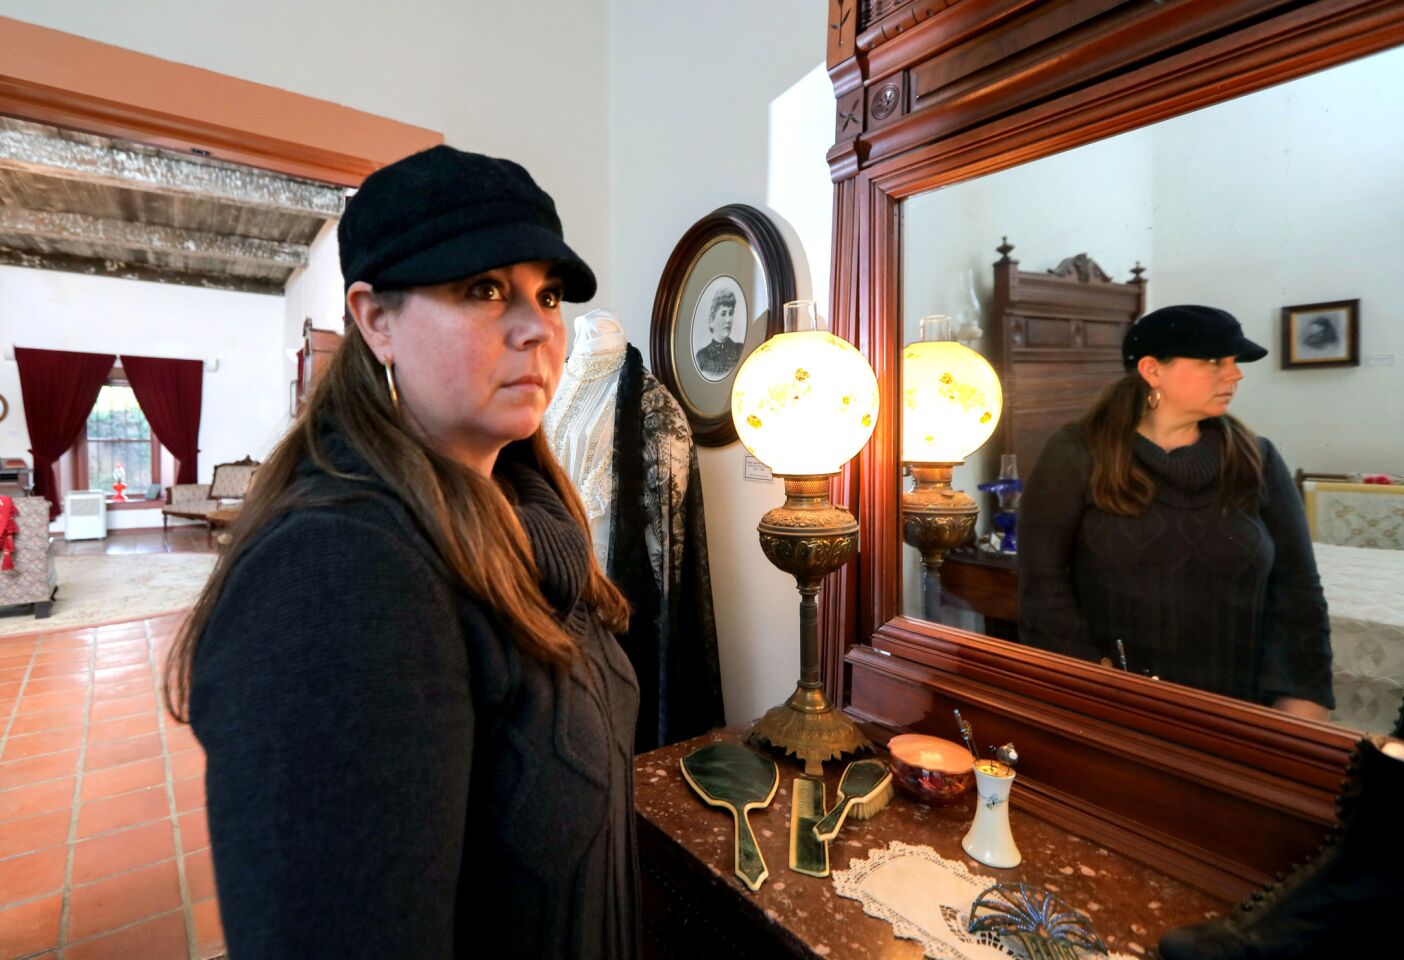 Paranormal researcher Nicole Strickland in the master bedroom of the Rancho Buena Vista Adobe. She's written a book about the hauntings of the historic dwelling.